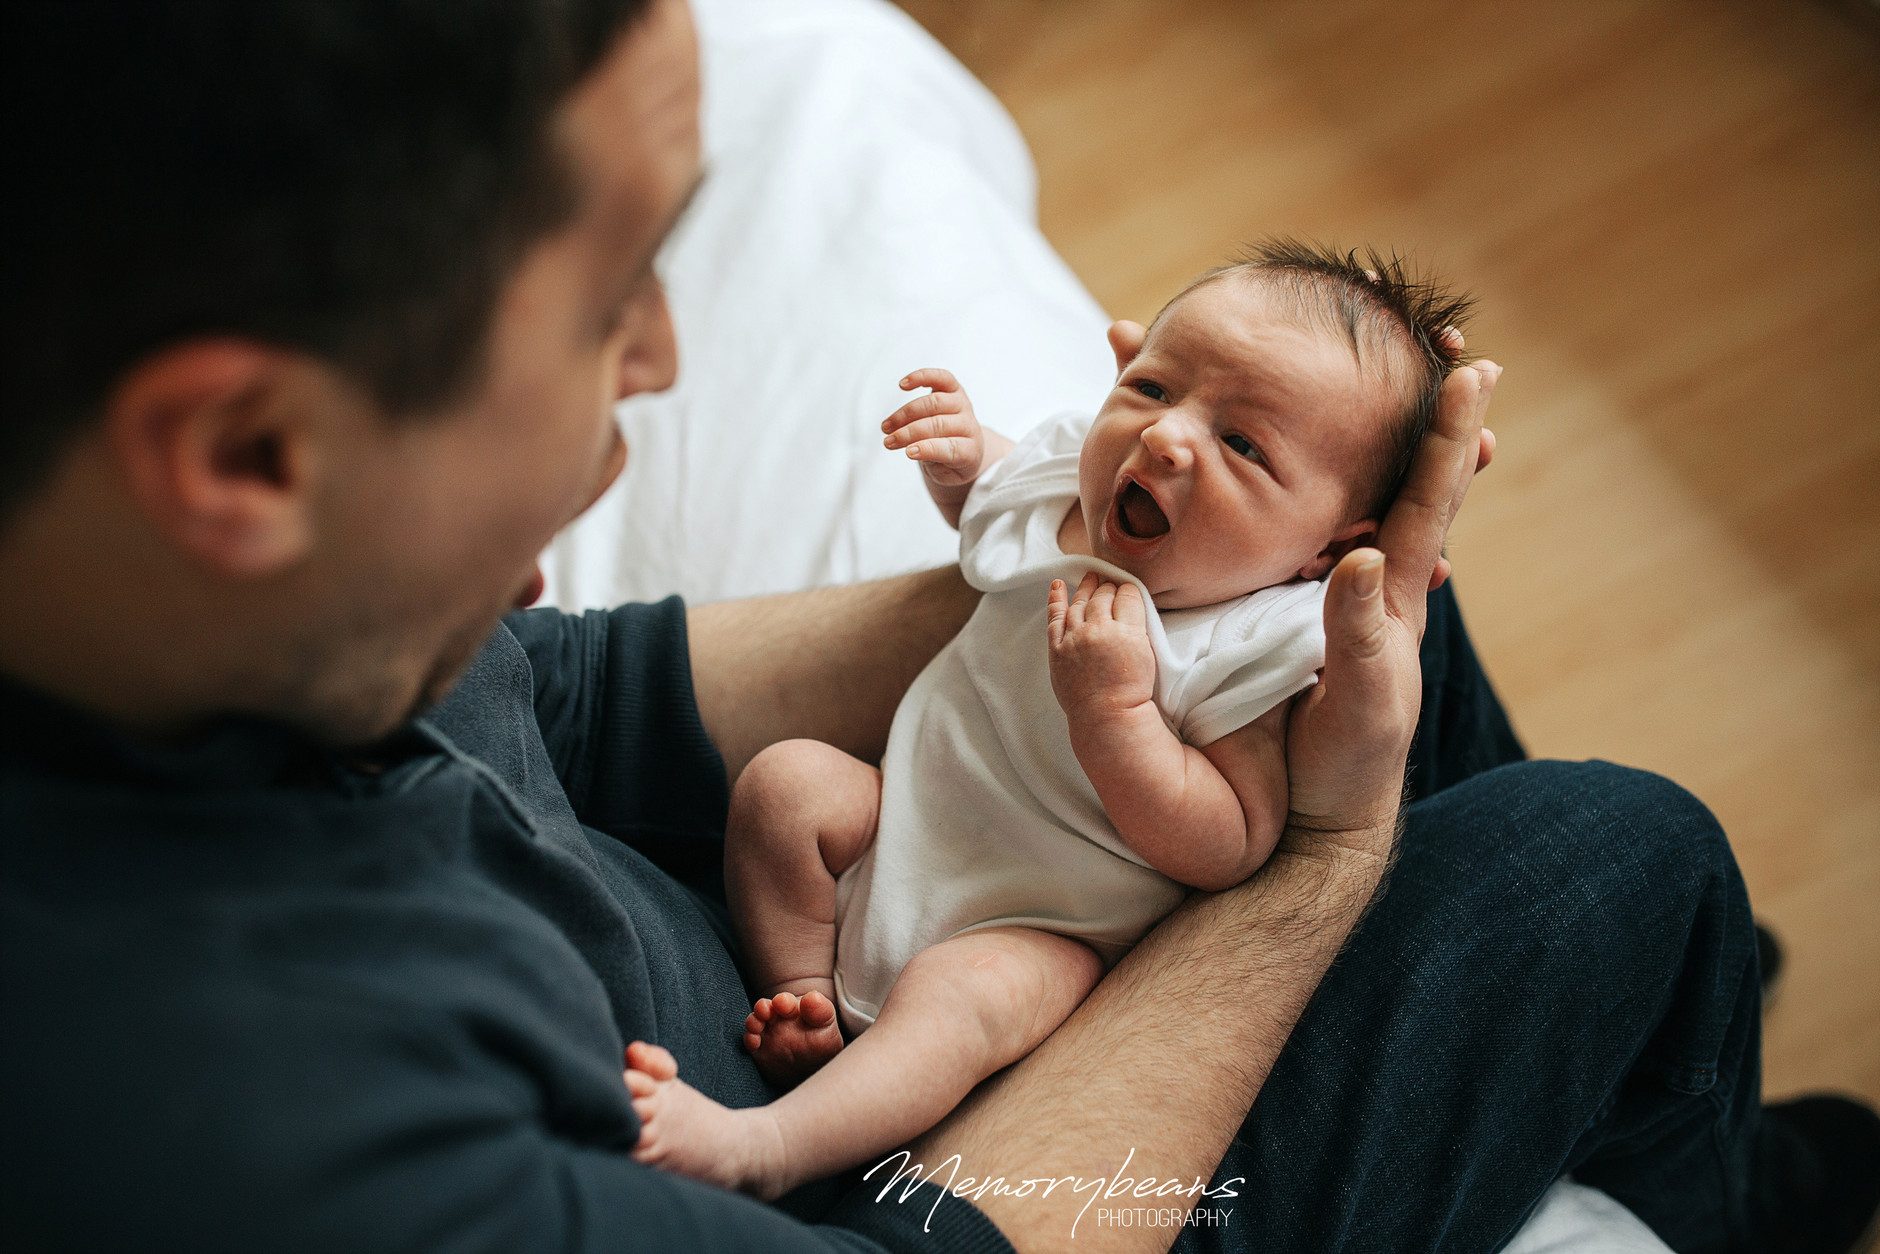 Newborn baby held by father with the same expression